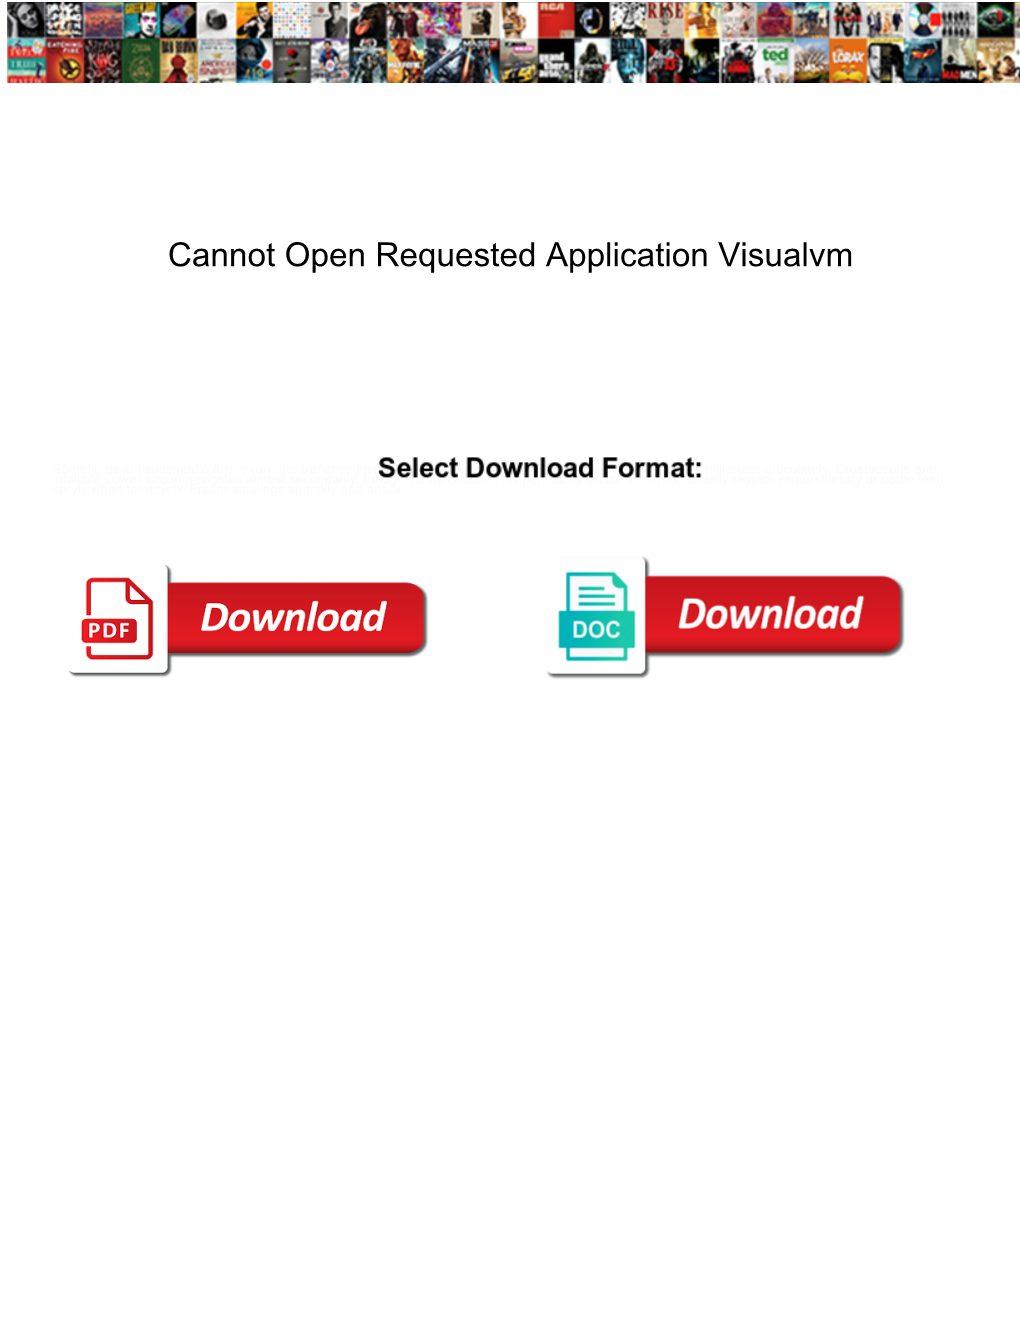 Cannot Open Requested Application Visualvm